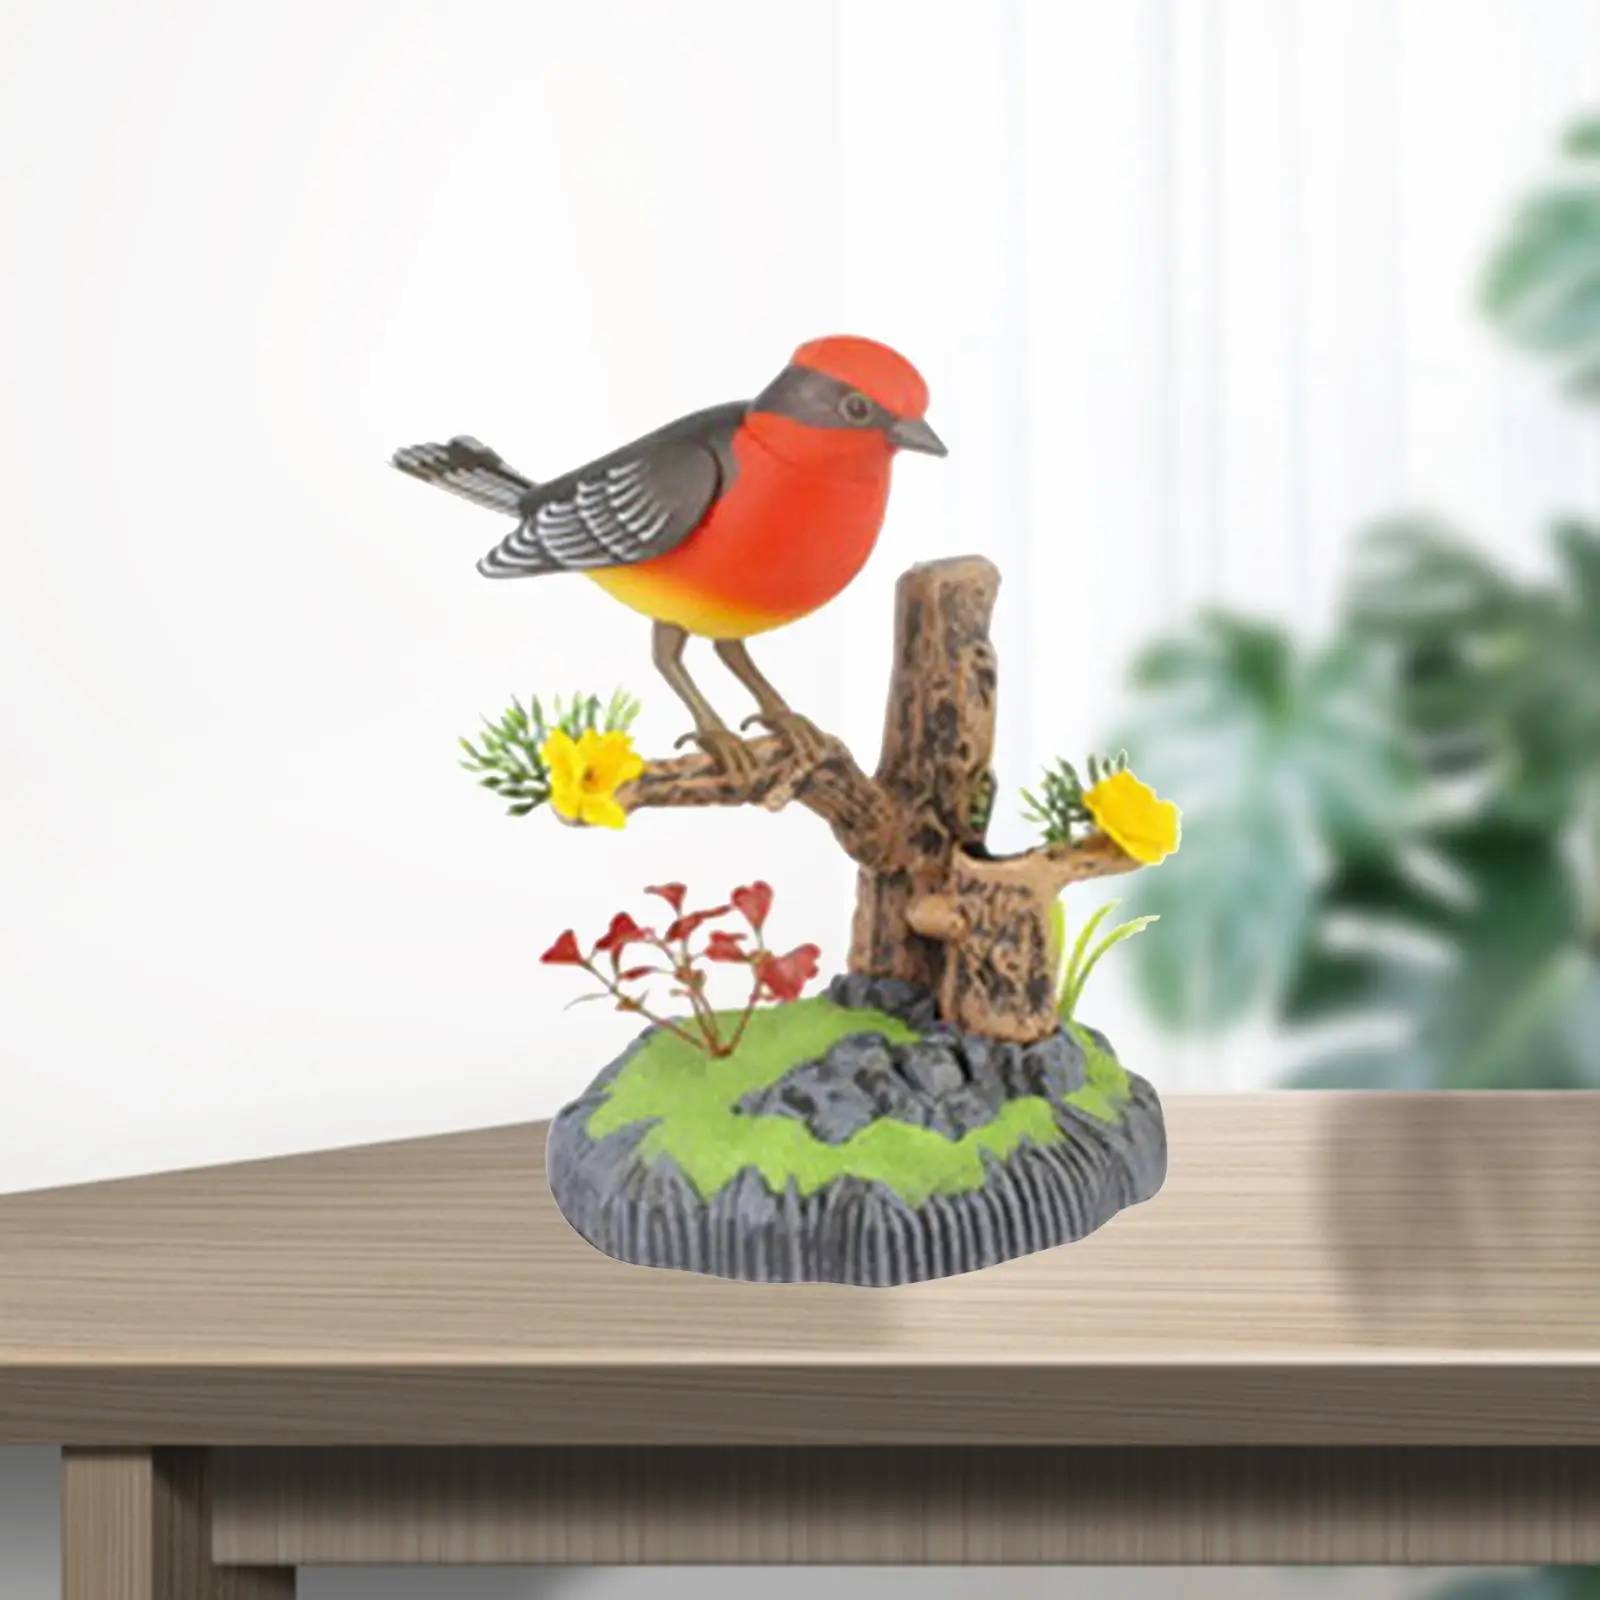 Singing and Chirping Birds   Ornament Battery Operated Voice-Activated Bird for home and garden Decor